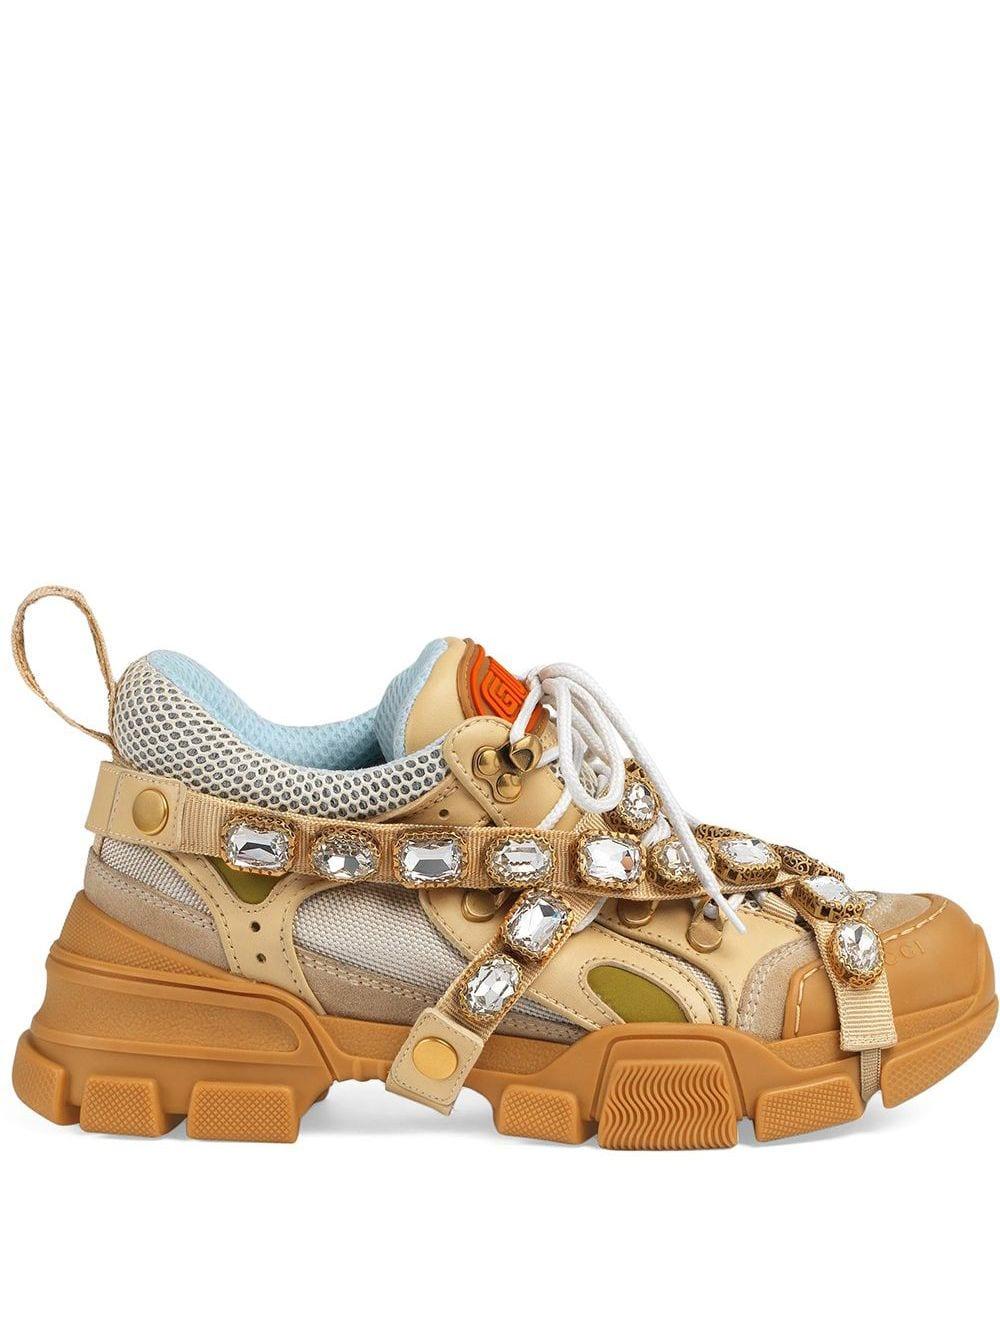 Gucci Flashtrek Sneaker With Removable Crystals in Natural | Lyst